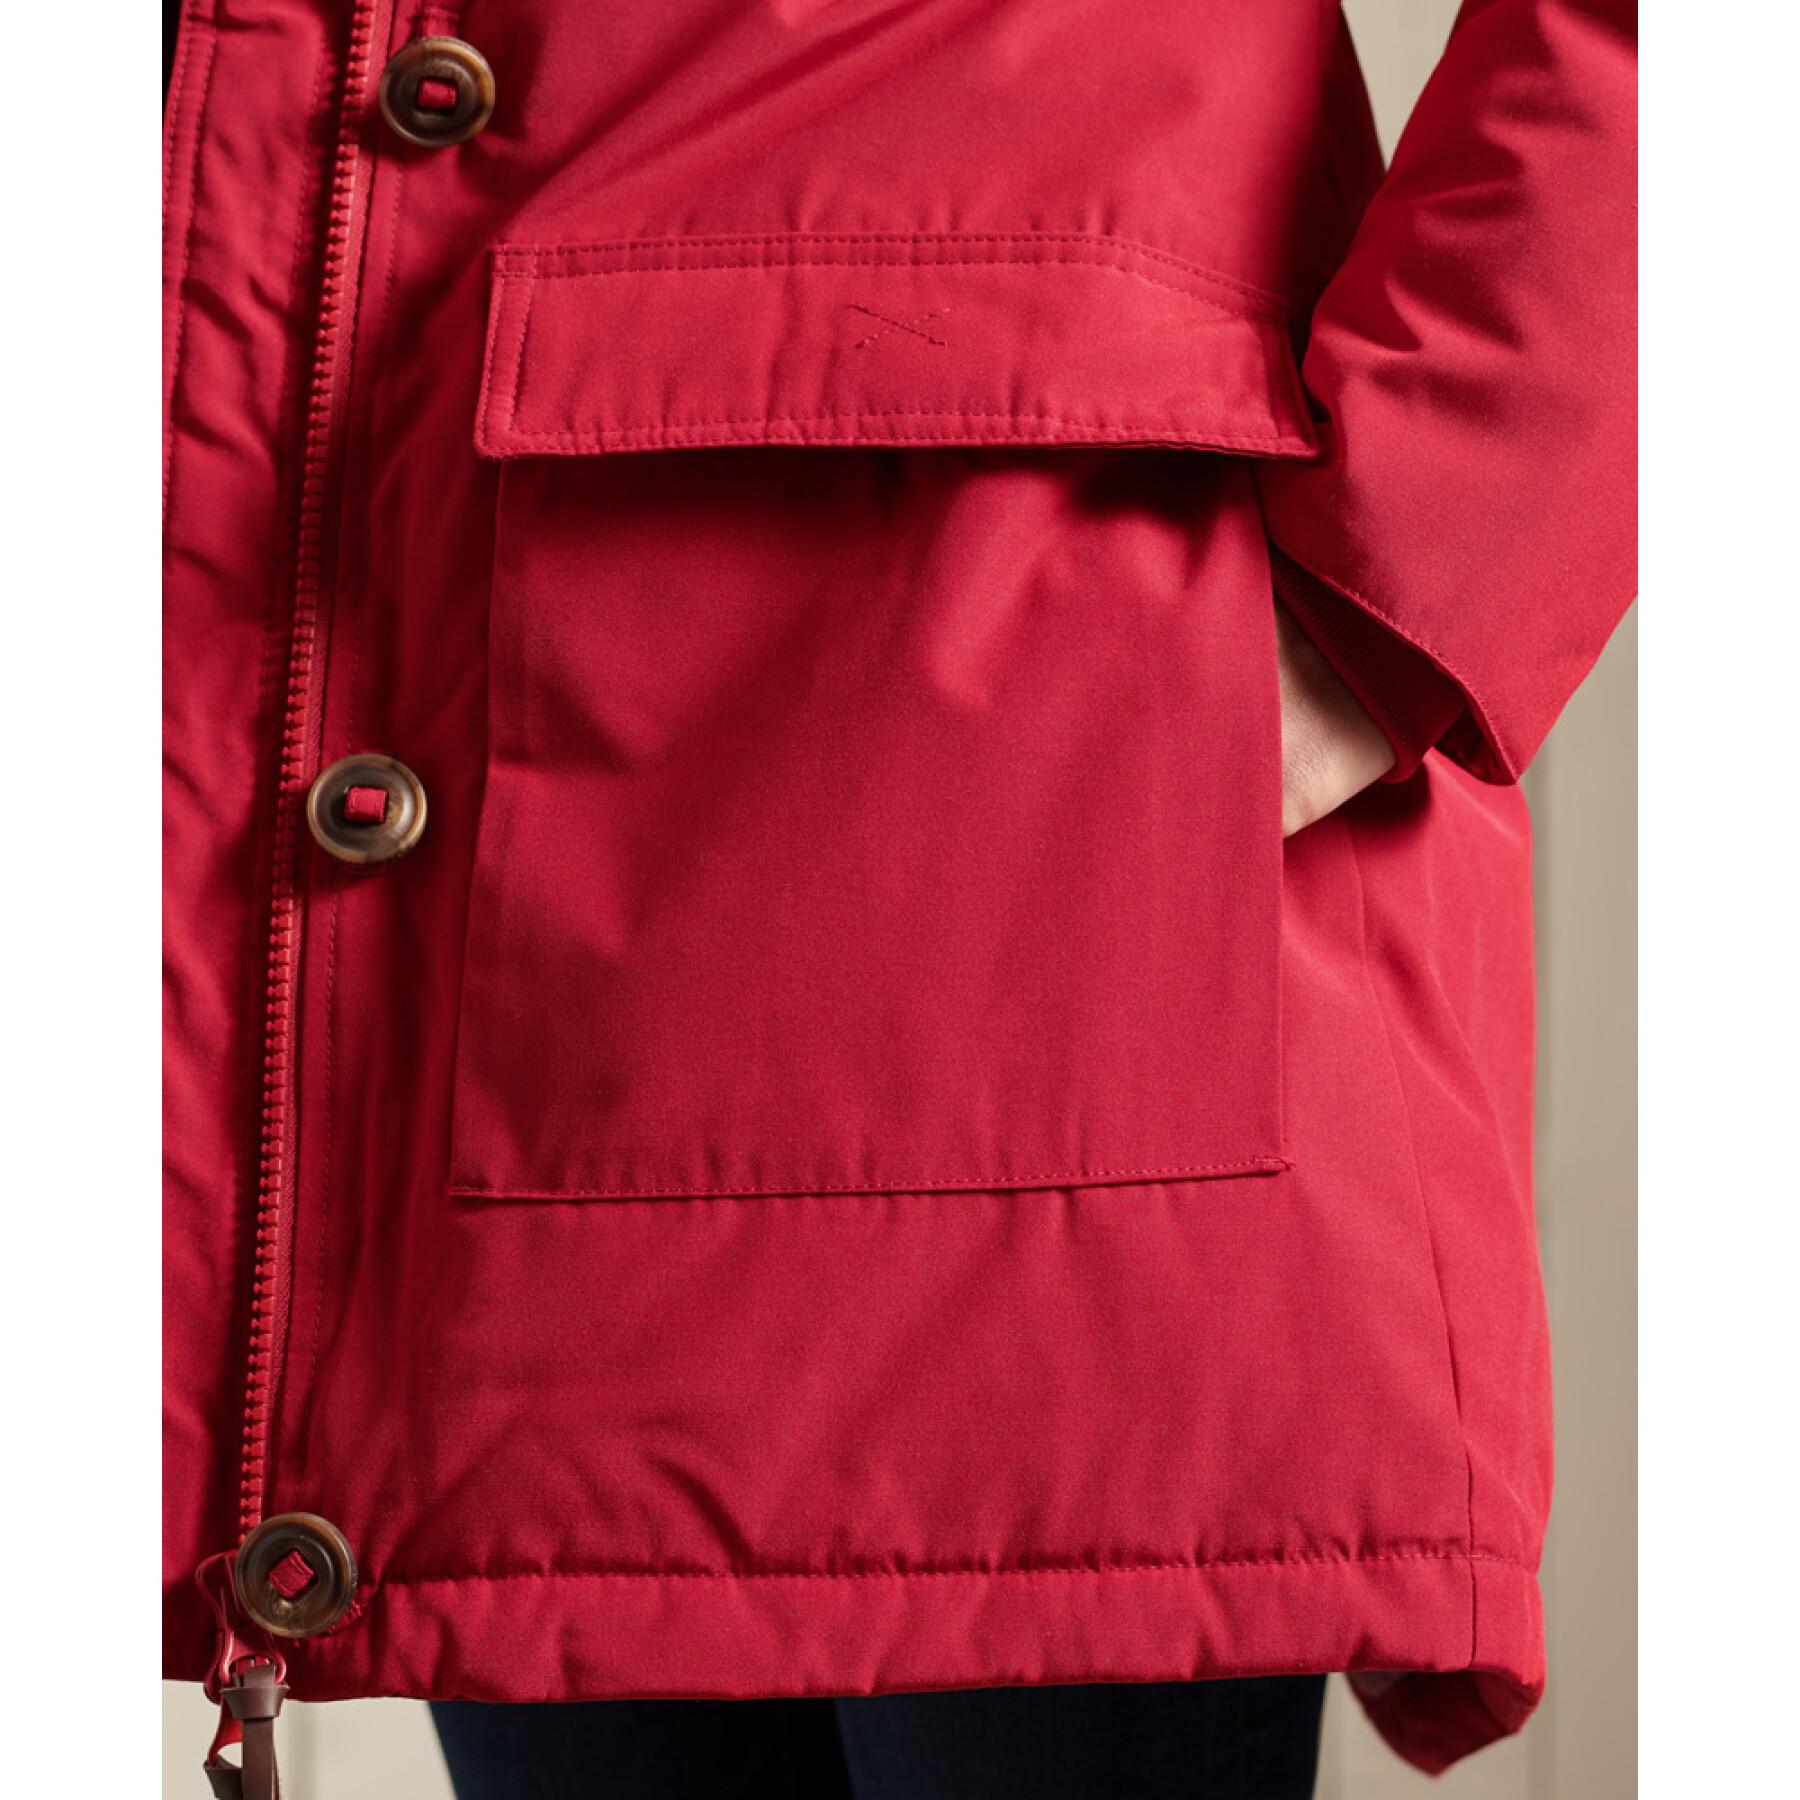 Women's padded parka Superdry Rookie